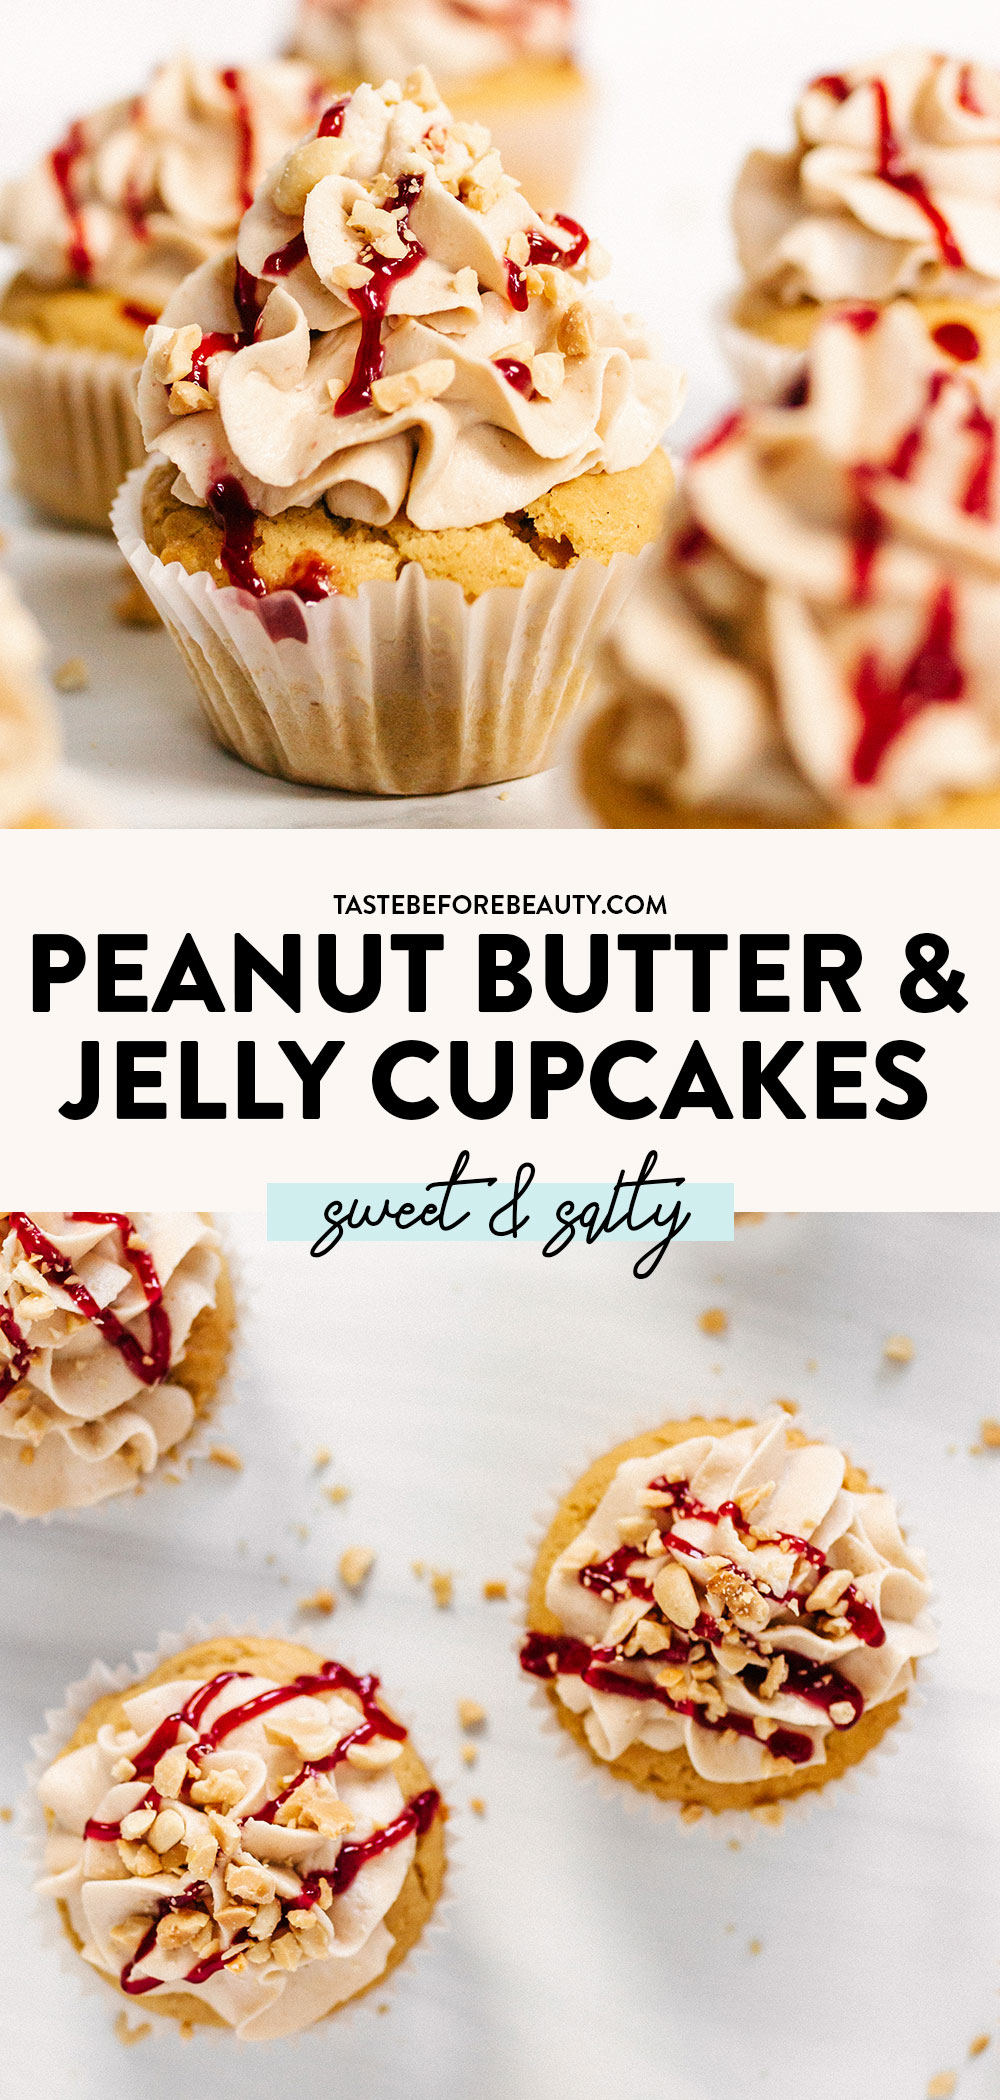 peanut butter and jelly cupcakes pinterest pin